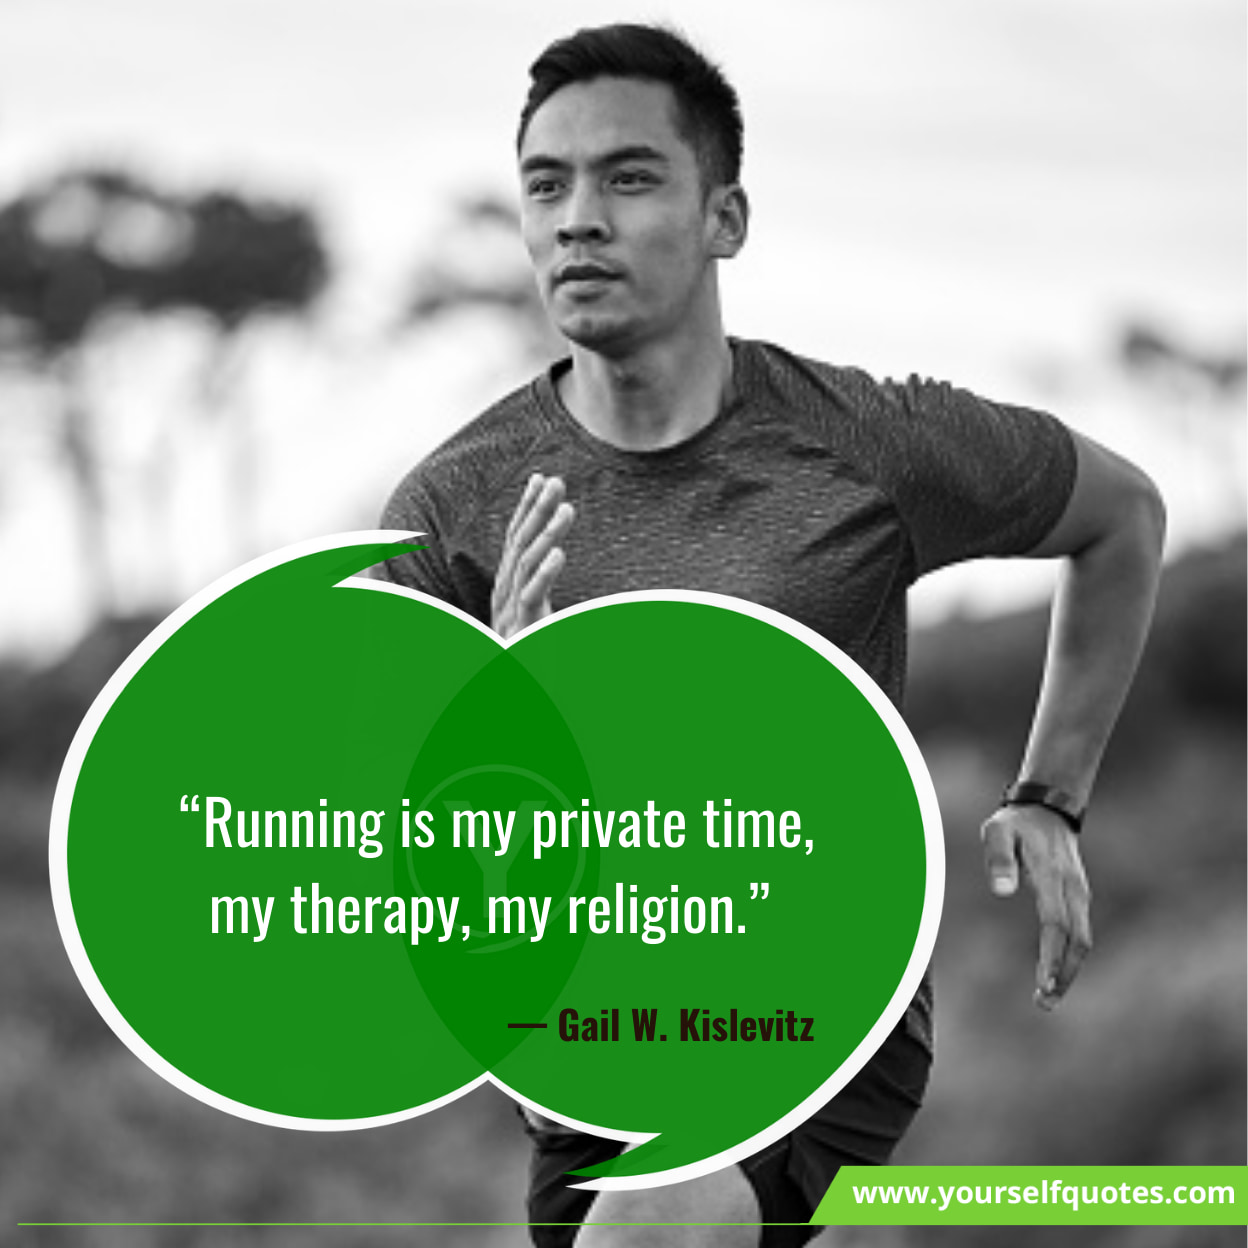 Running Quotes By Famous Runner's